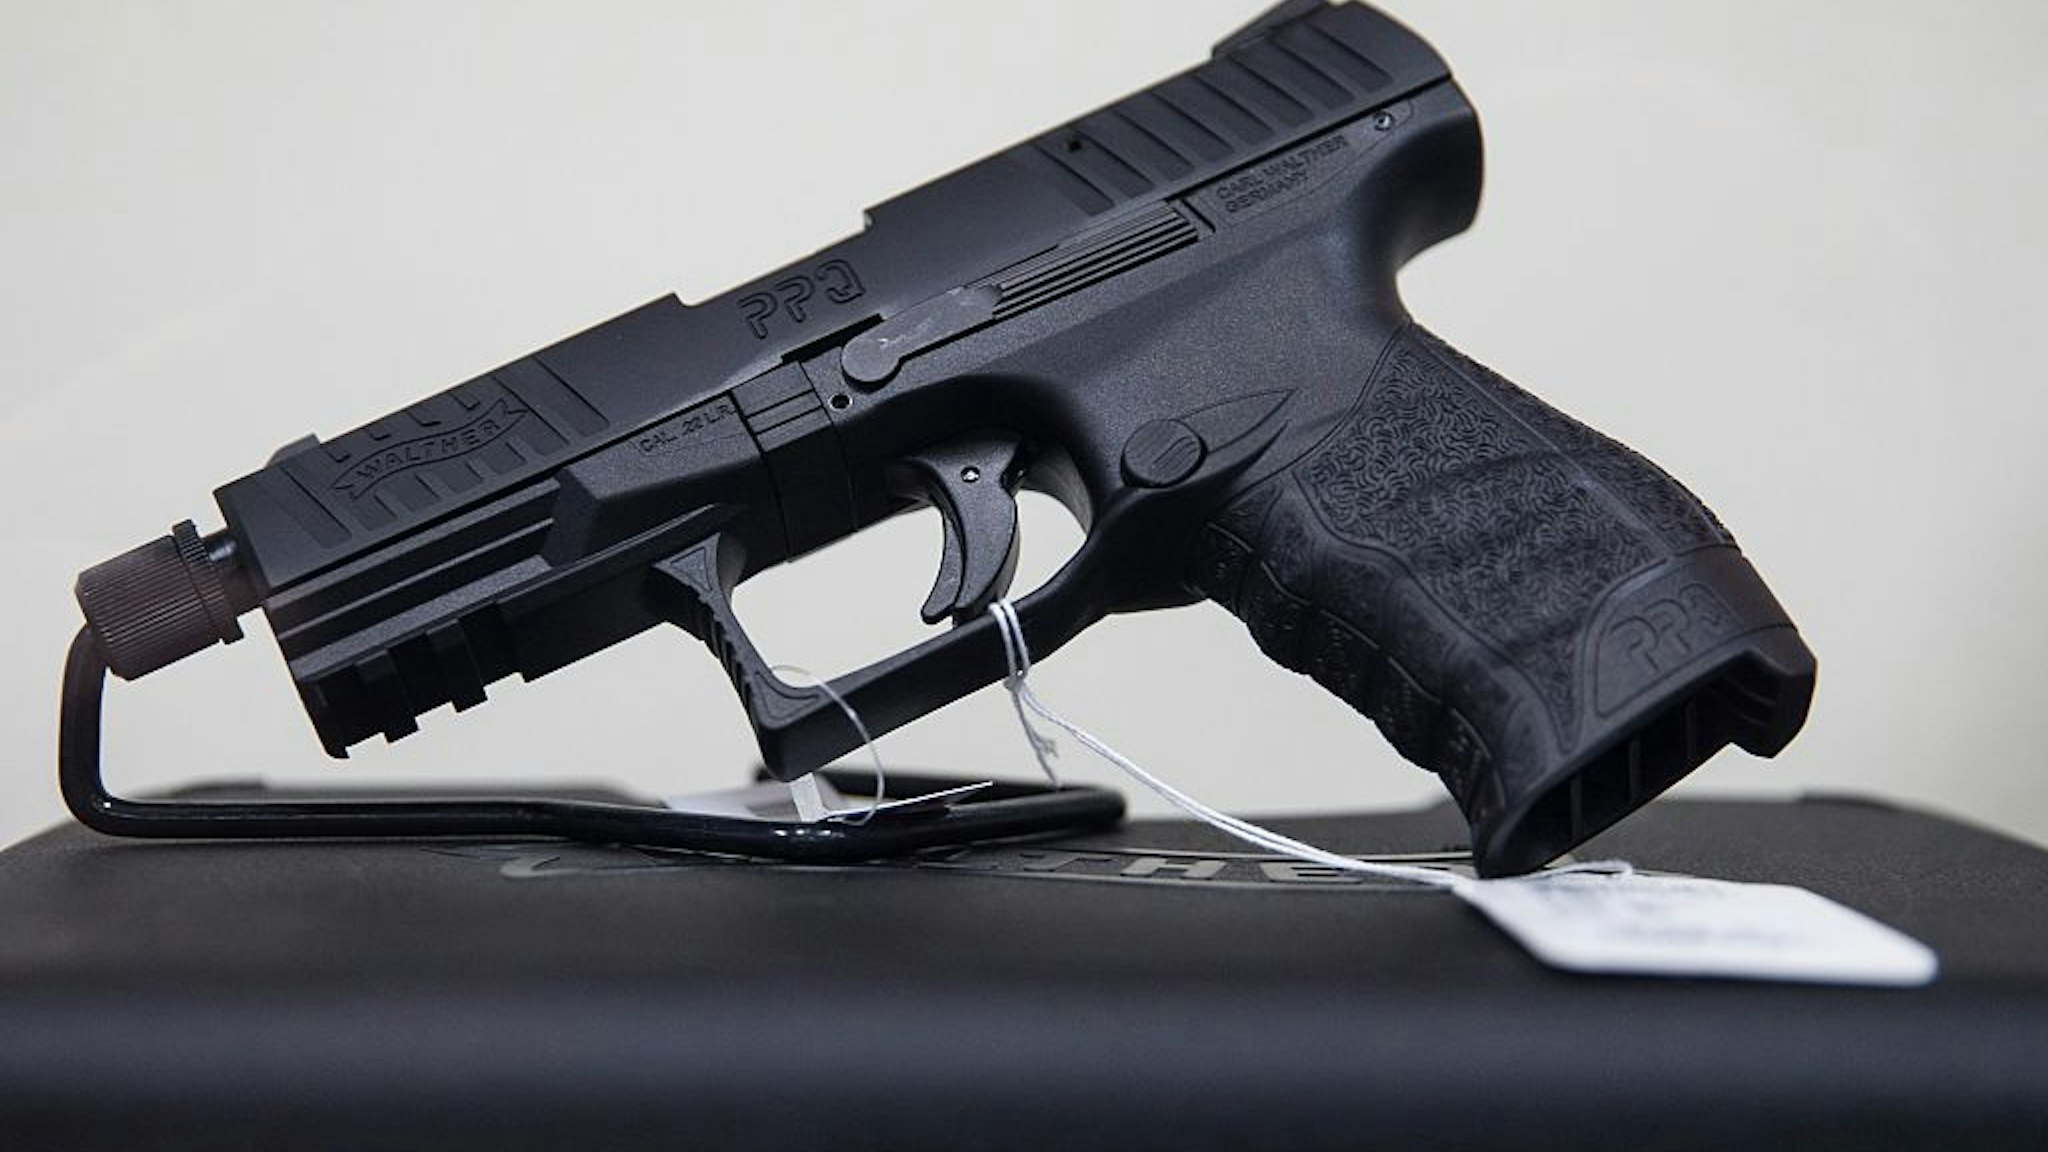 A Walther PPQ pistol for sale at Blue Ridge Arsenal in Chantilly, Va., USA on January 9, 2015.